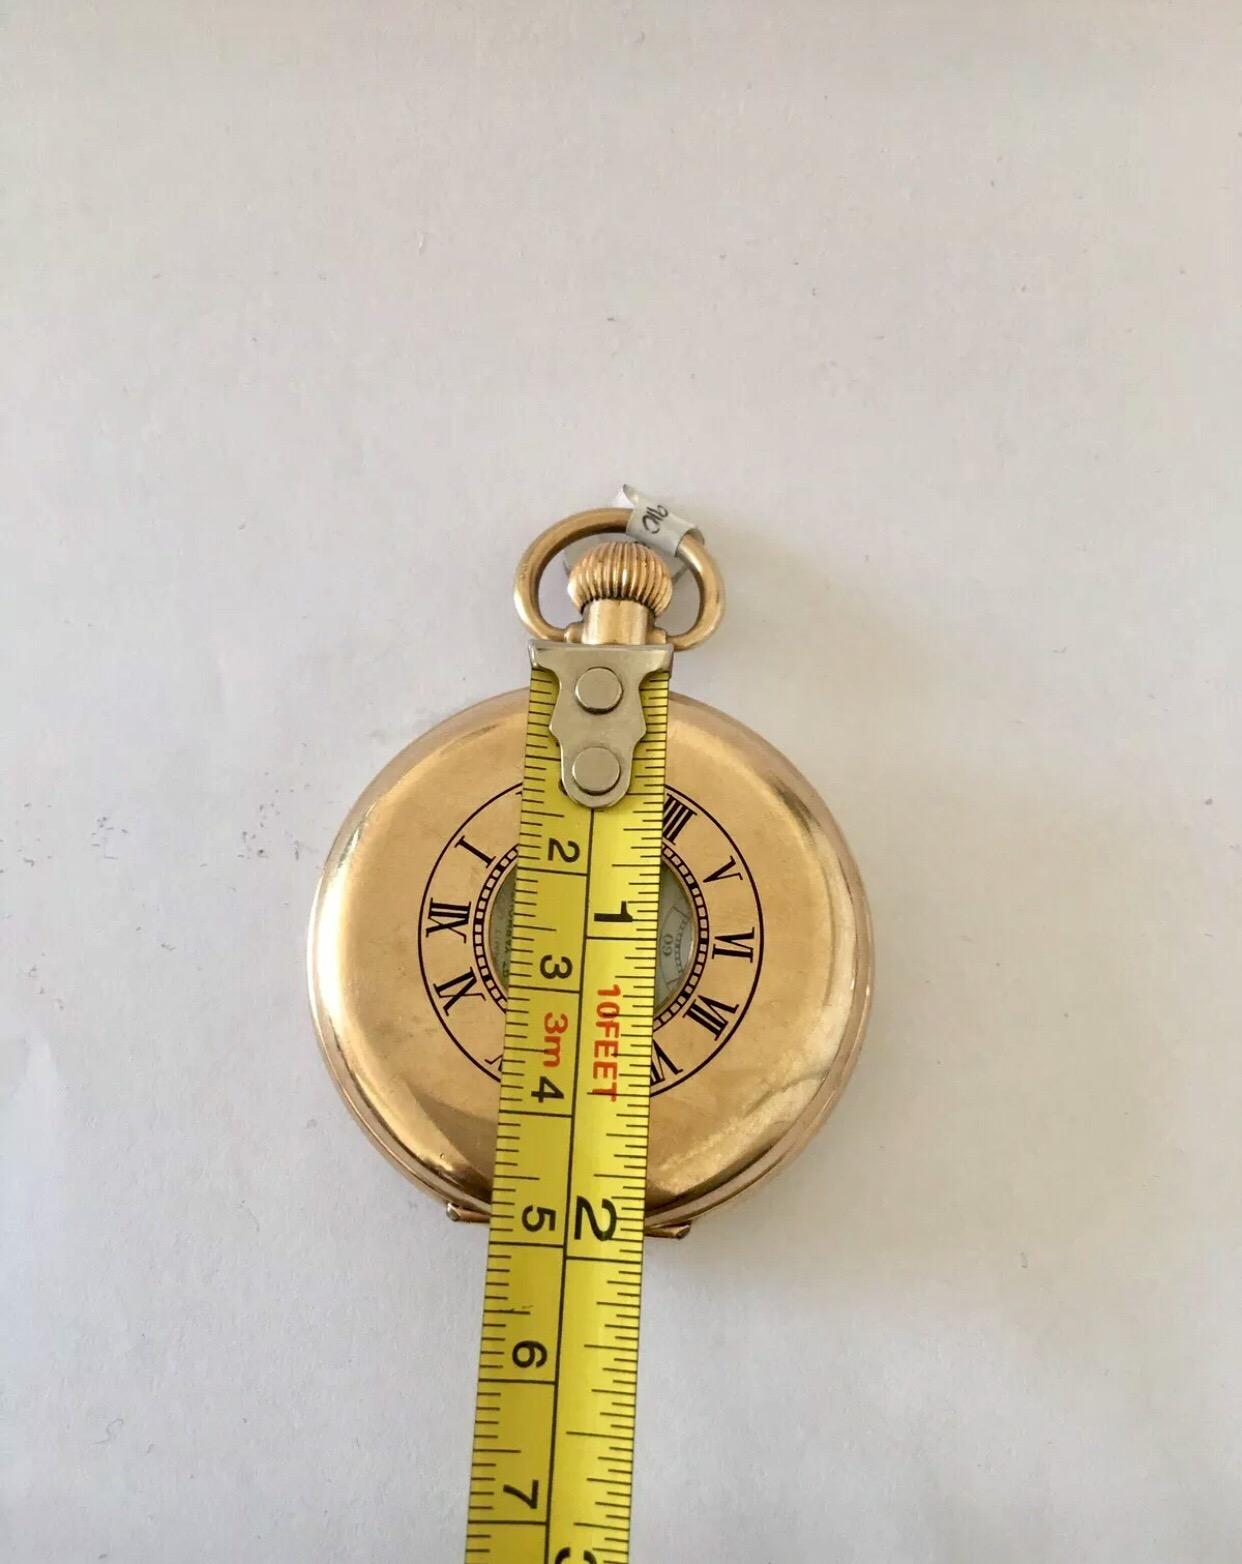 Antique Gold-Plated Half Hunter Pocket Watch Signed Cox & Son, GT Yarmouth 3